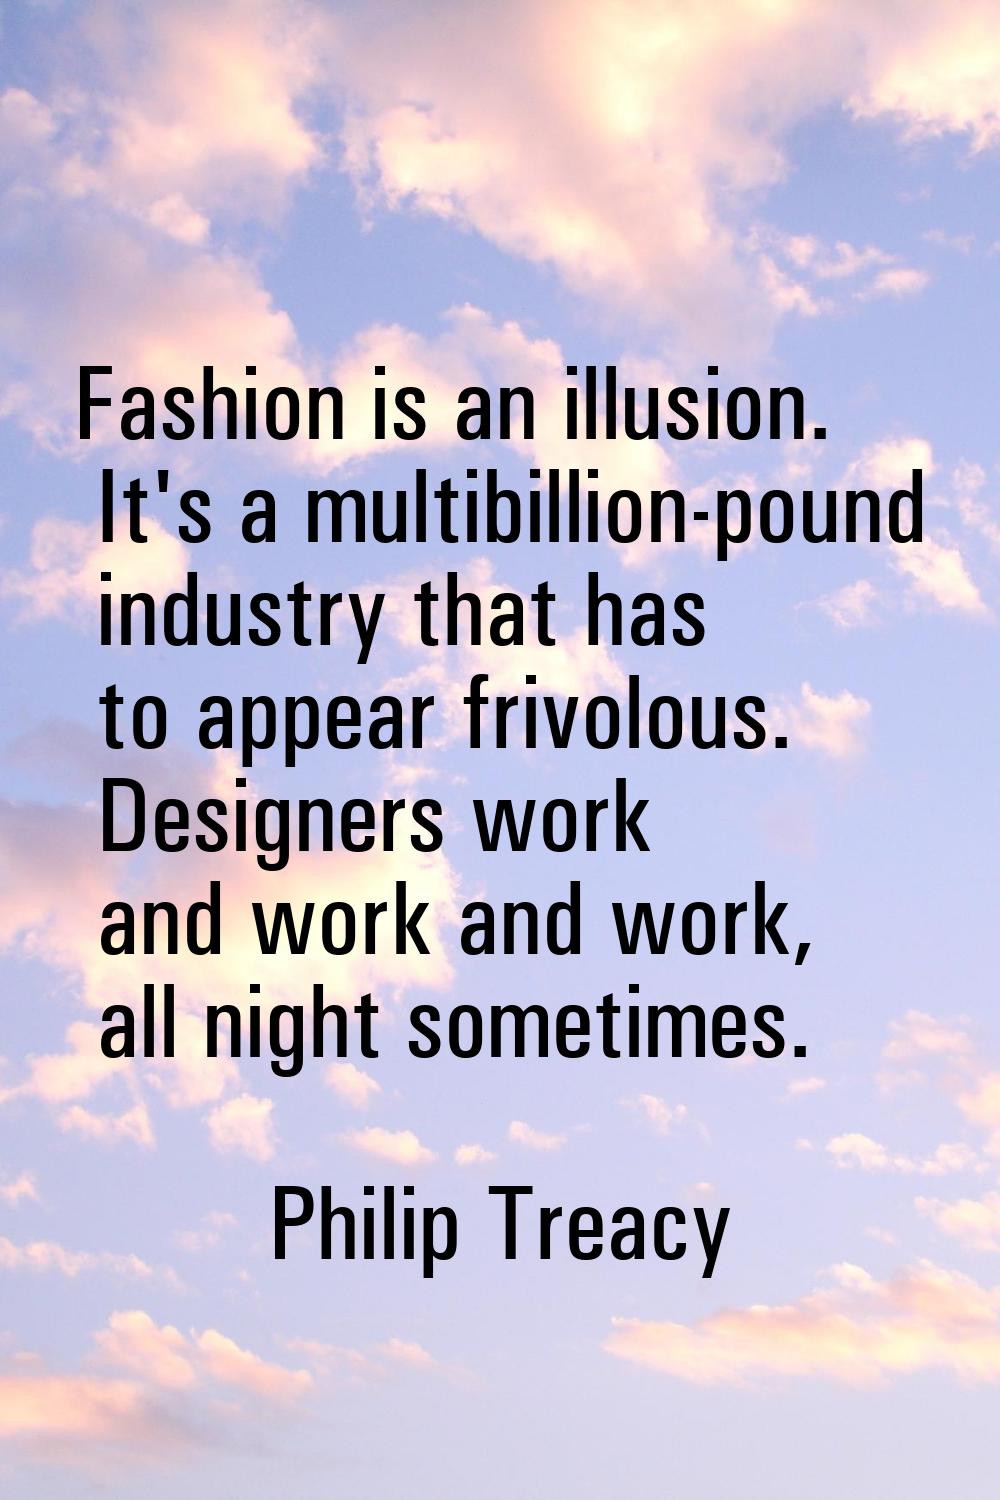 Fashion is an illusion. It's a multibillion-pound industry that has to appear frivolous. Designers 